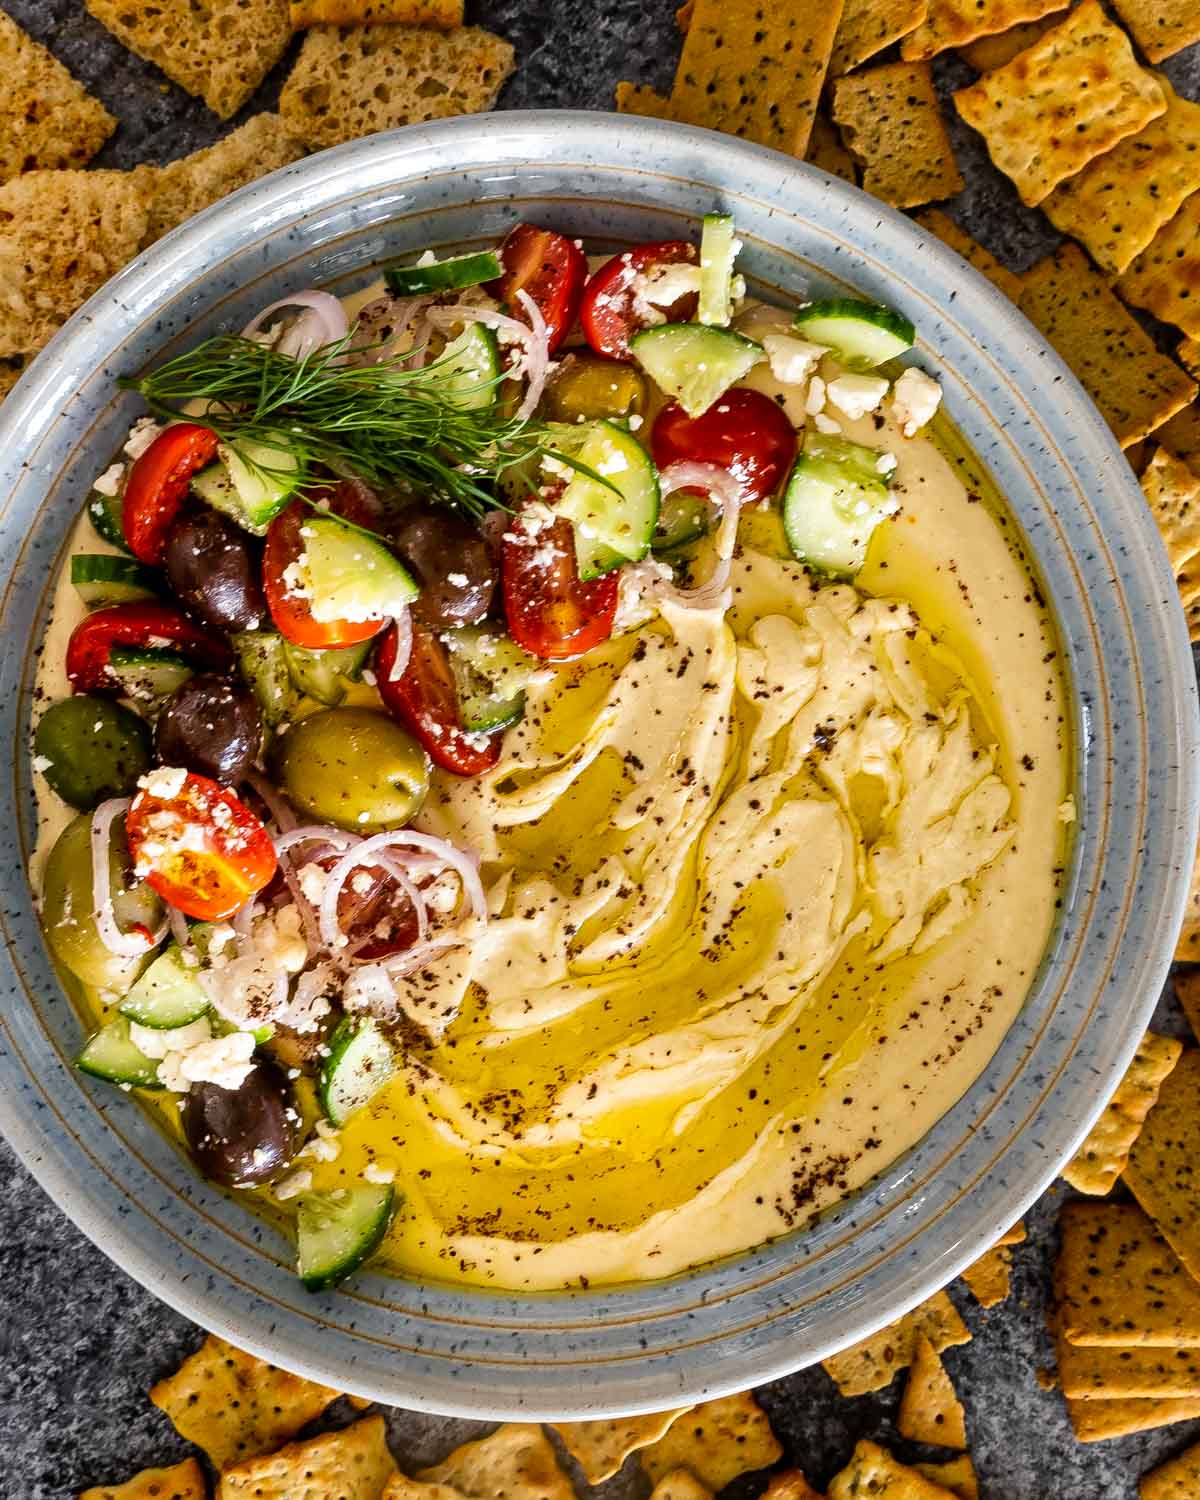 freshly made hummus drizzled with olive oil and garnished with tomatoes cucumbers and olives.